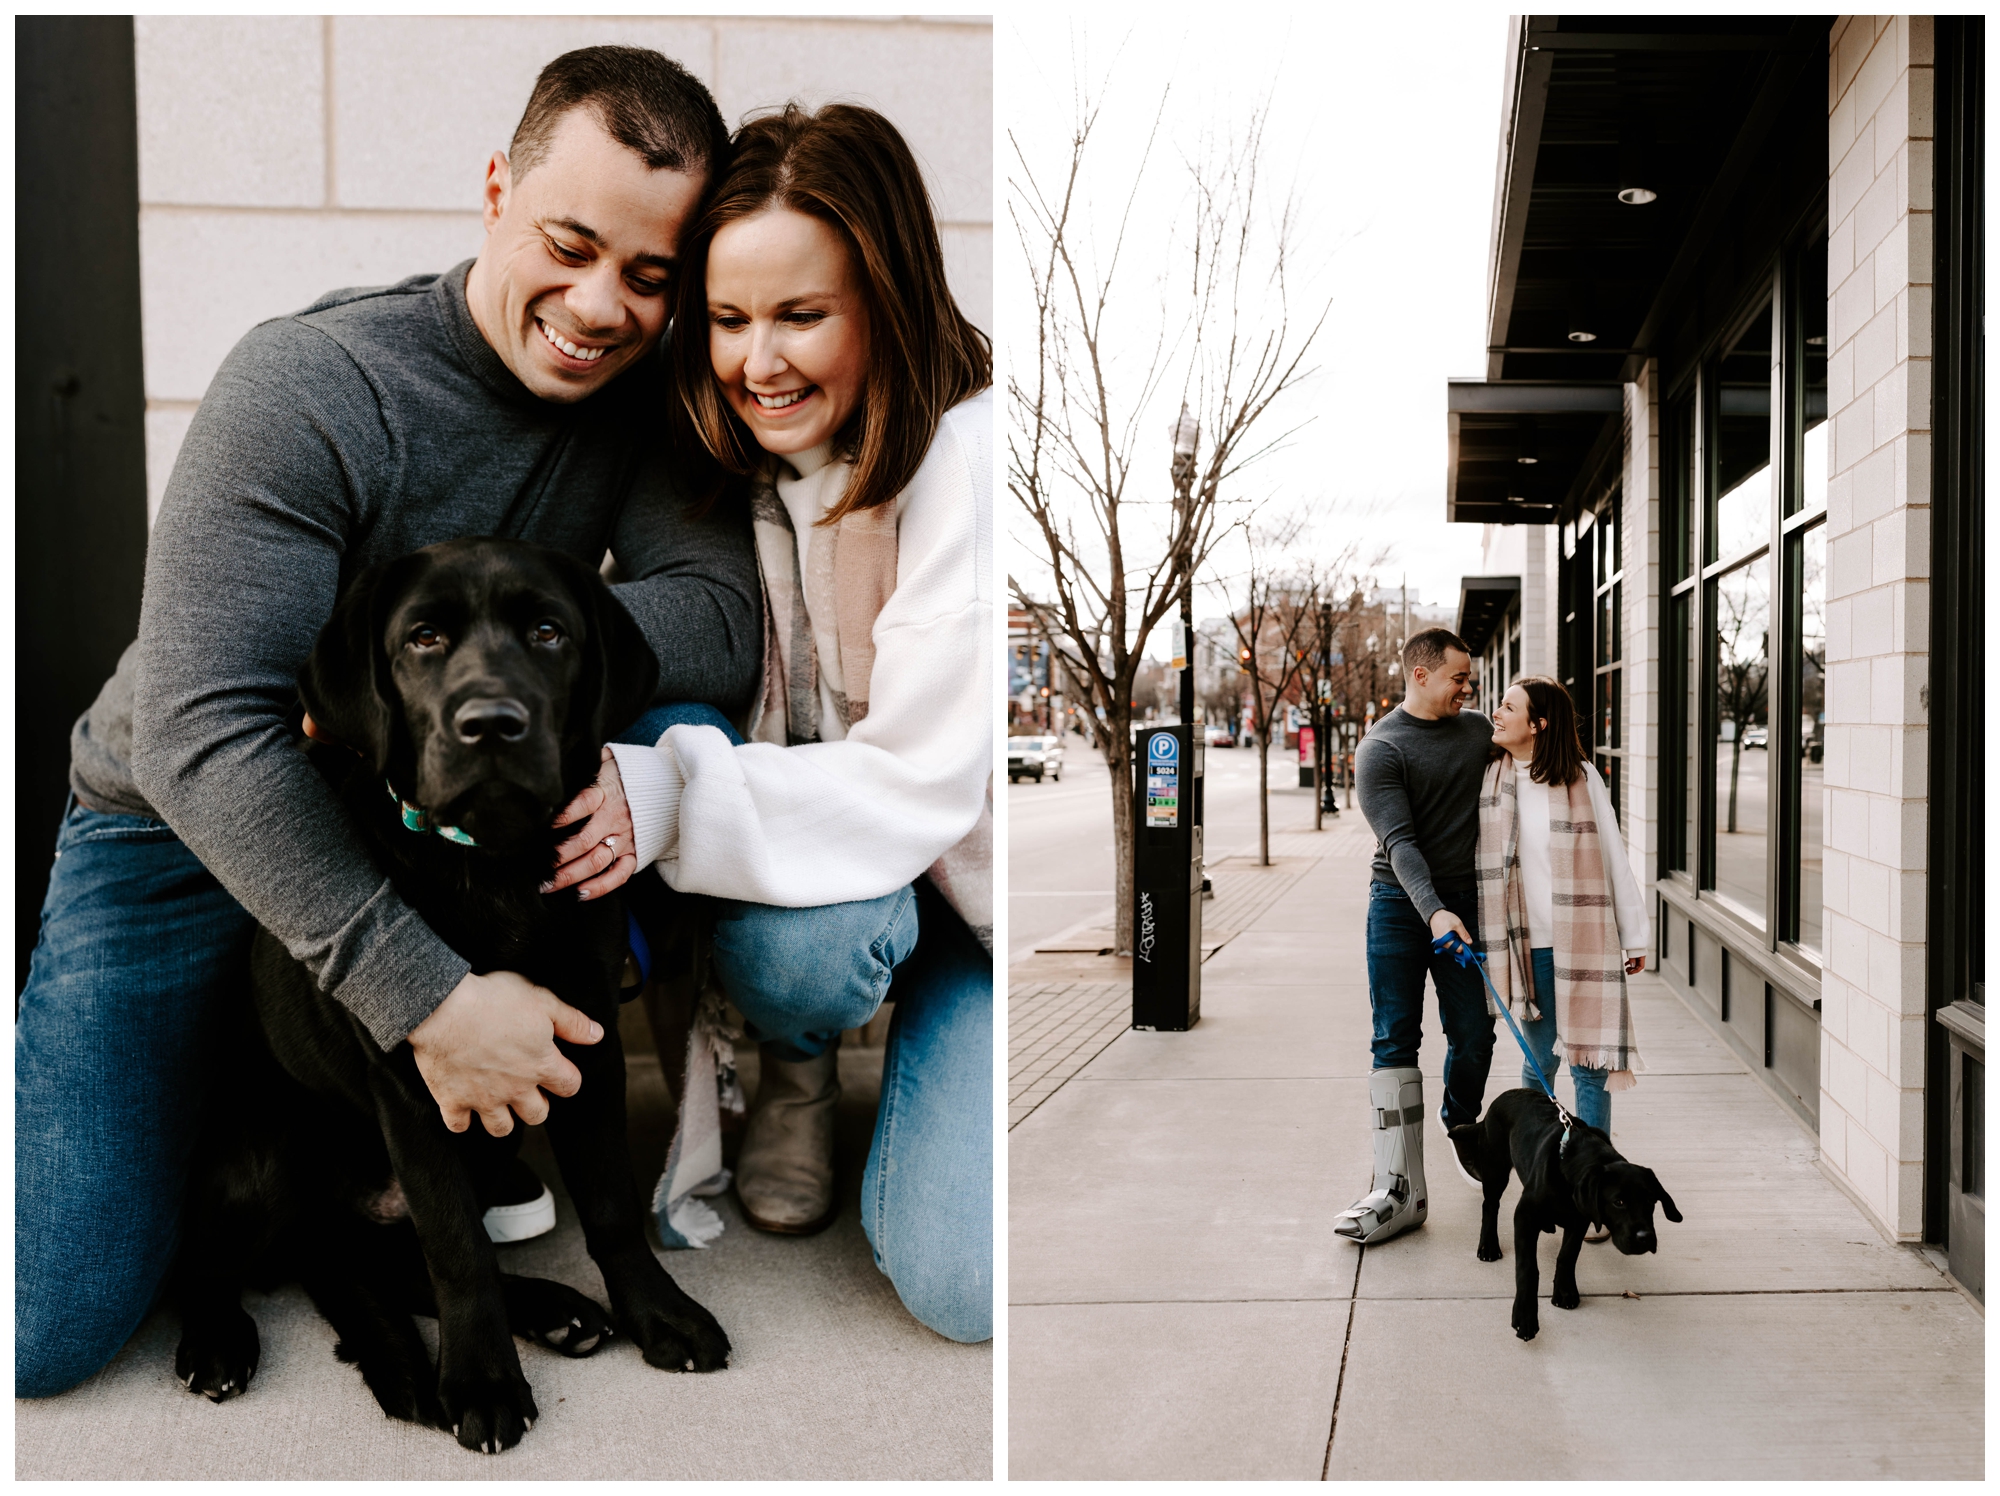 The Strip District Pittsburgh engagement photos